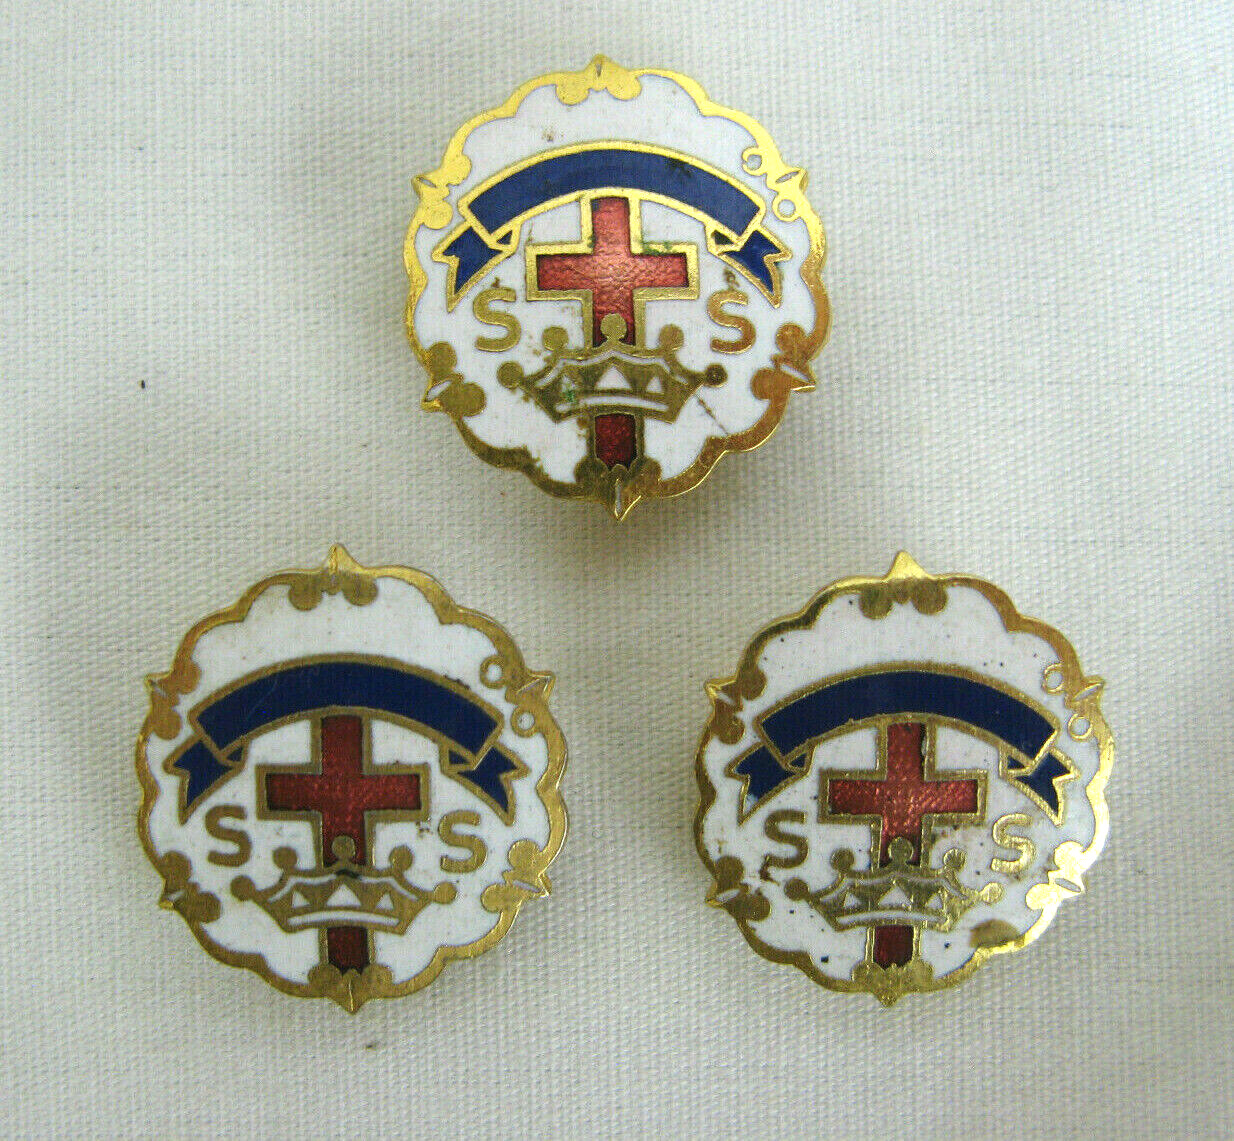 Lot of 3 Sunday School Lapel Pins Tie Tacks (First Year Pins) 